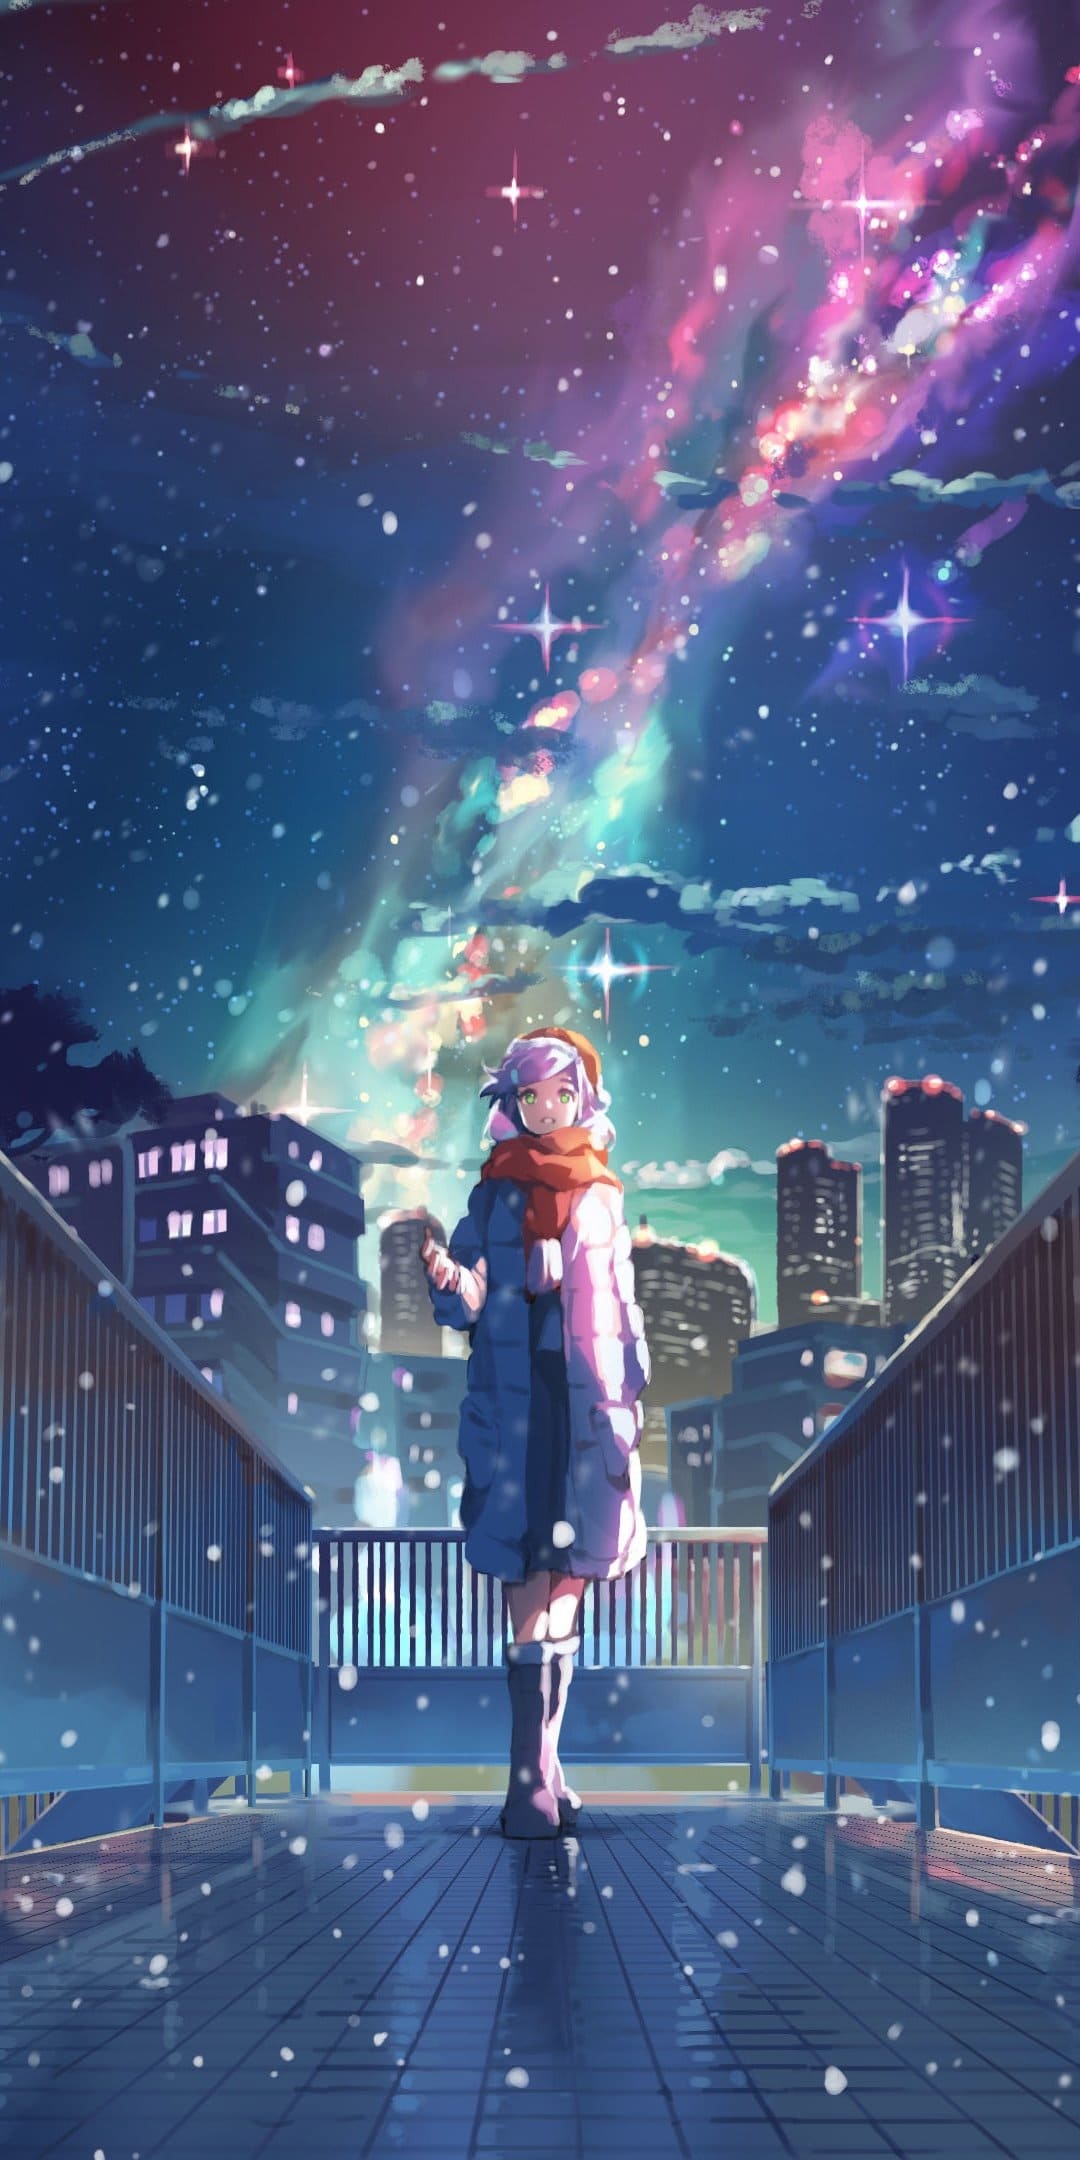 A girl is standing on the bridge in front of stars - Anime landscape